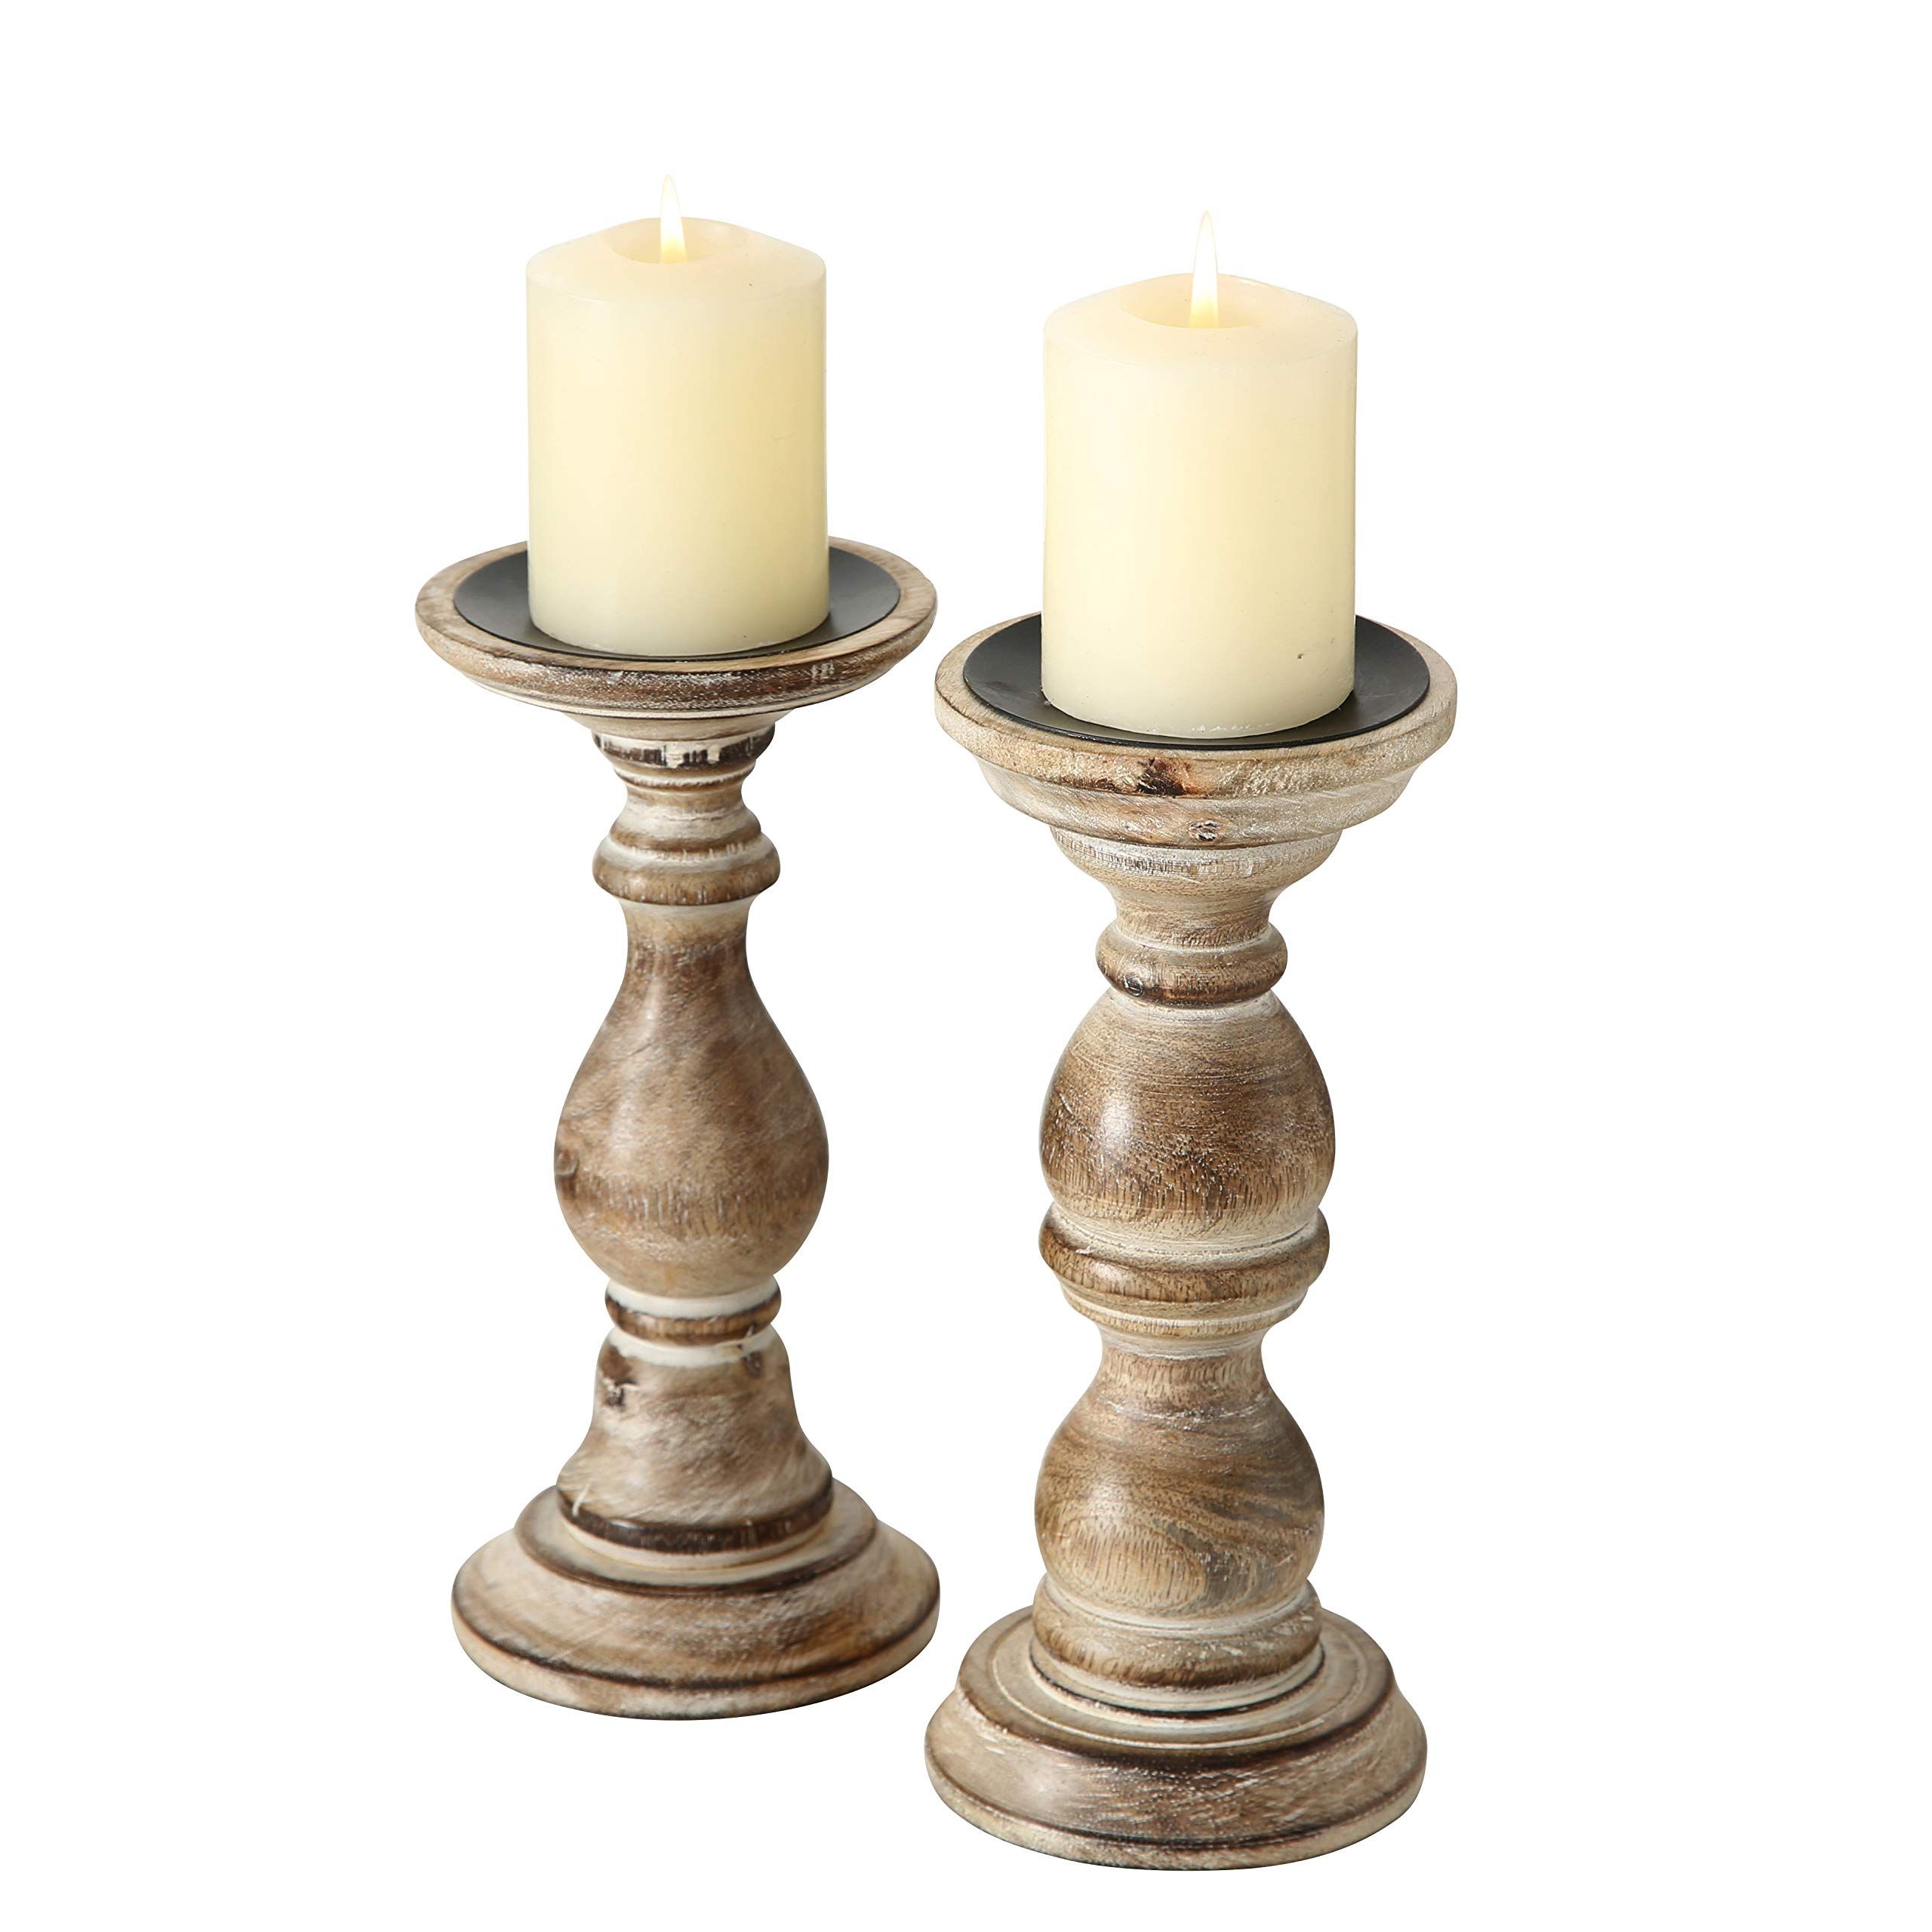 WHW Whole House Worlds Rustic Stockbridge Wooden Candle Holders, Set of 2, Spiked Metal Top, Rounded | Amazon (US)